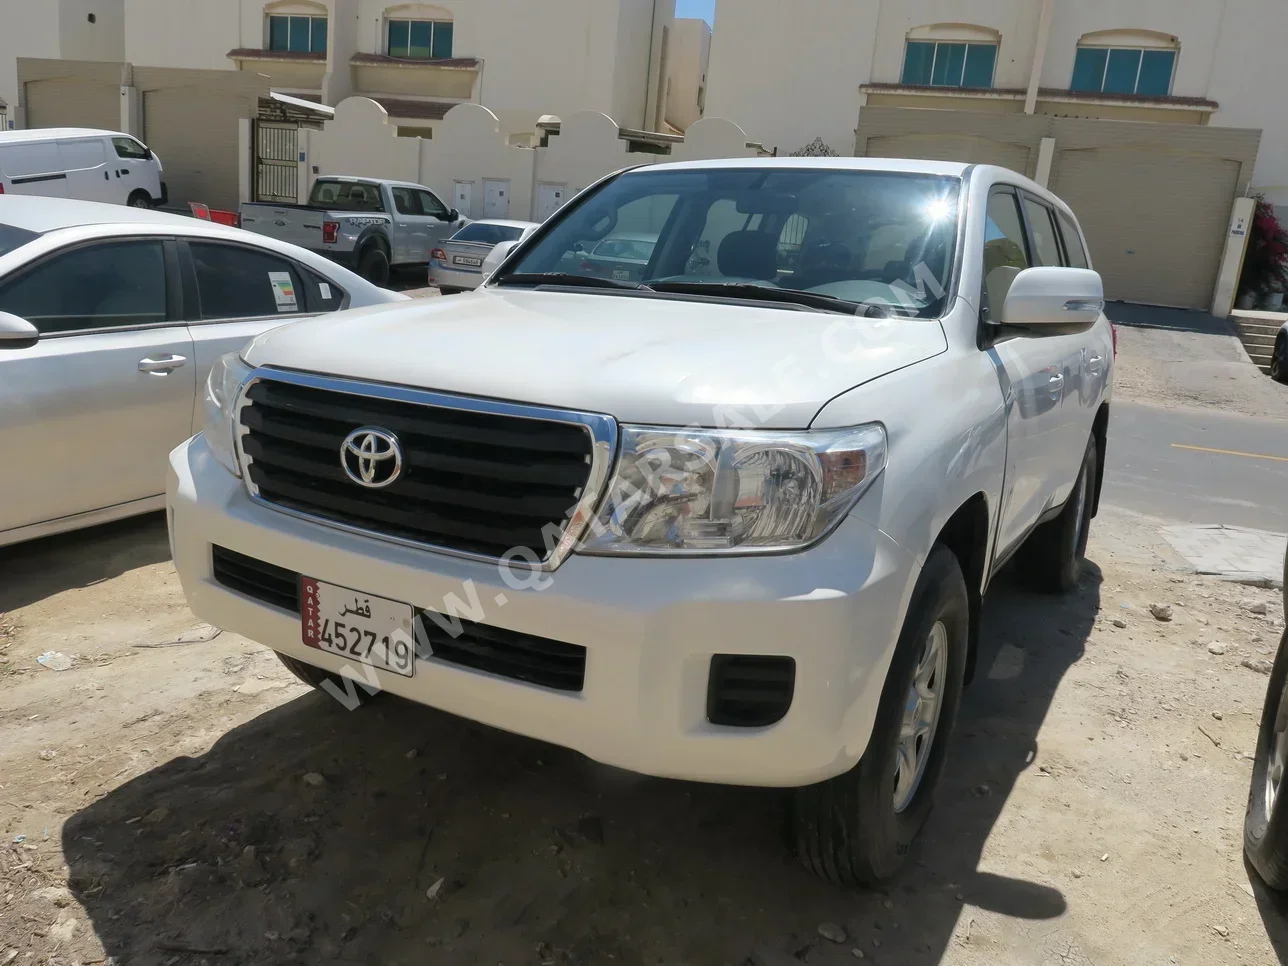 Toyota  Land Cruiser  G  2013  Automatic  49,000 Km  6 Cylinder  Four Wheel Drive (4WD)  SUV  Pearl